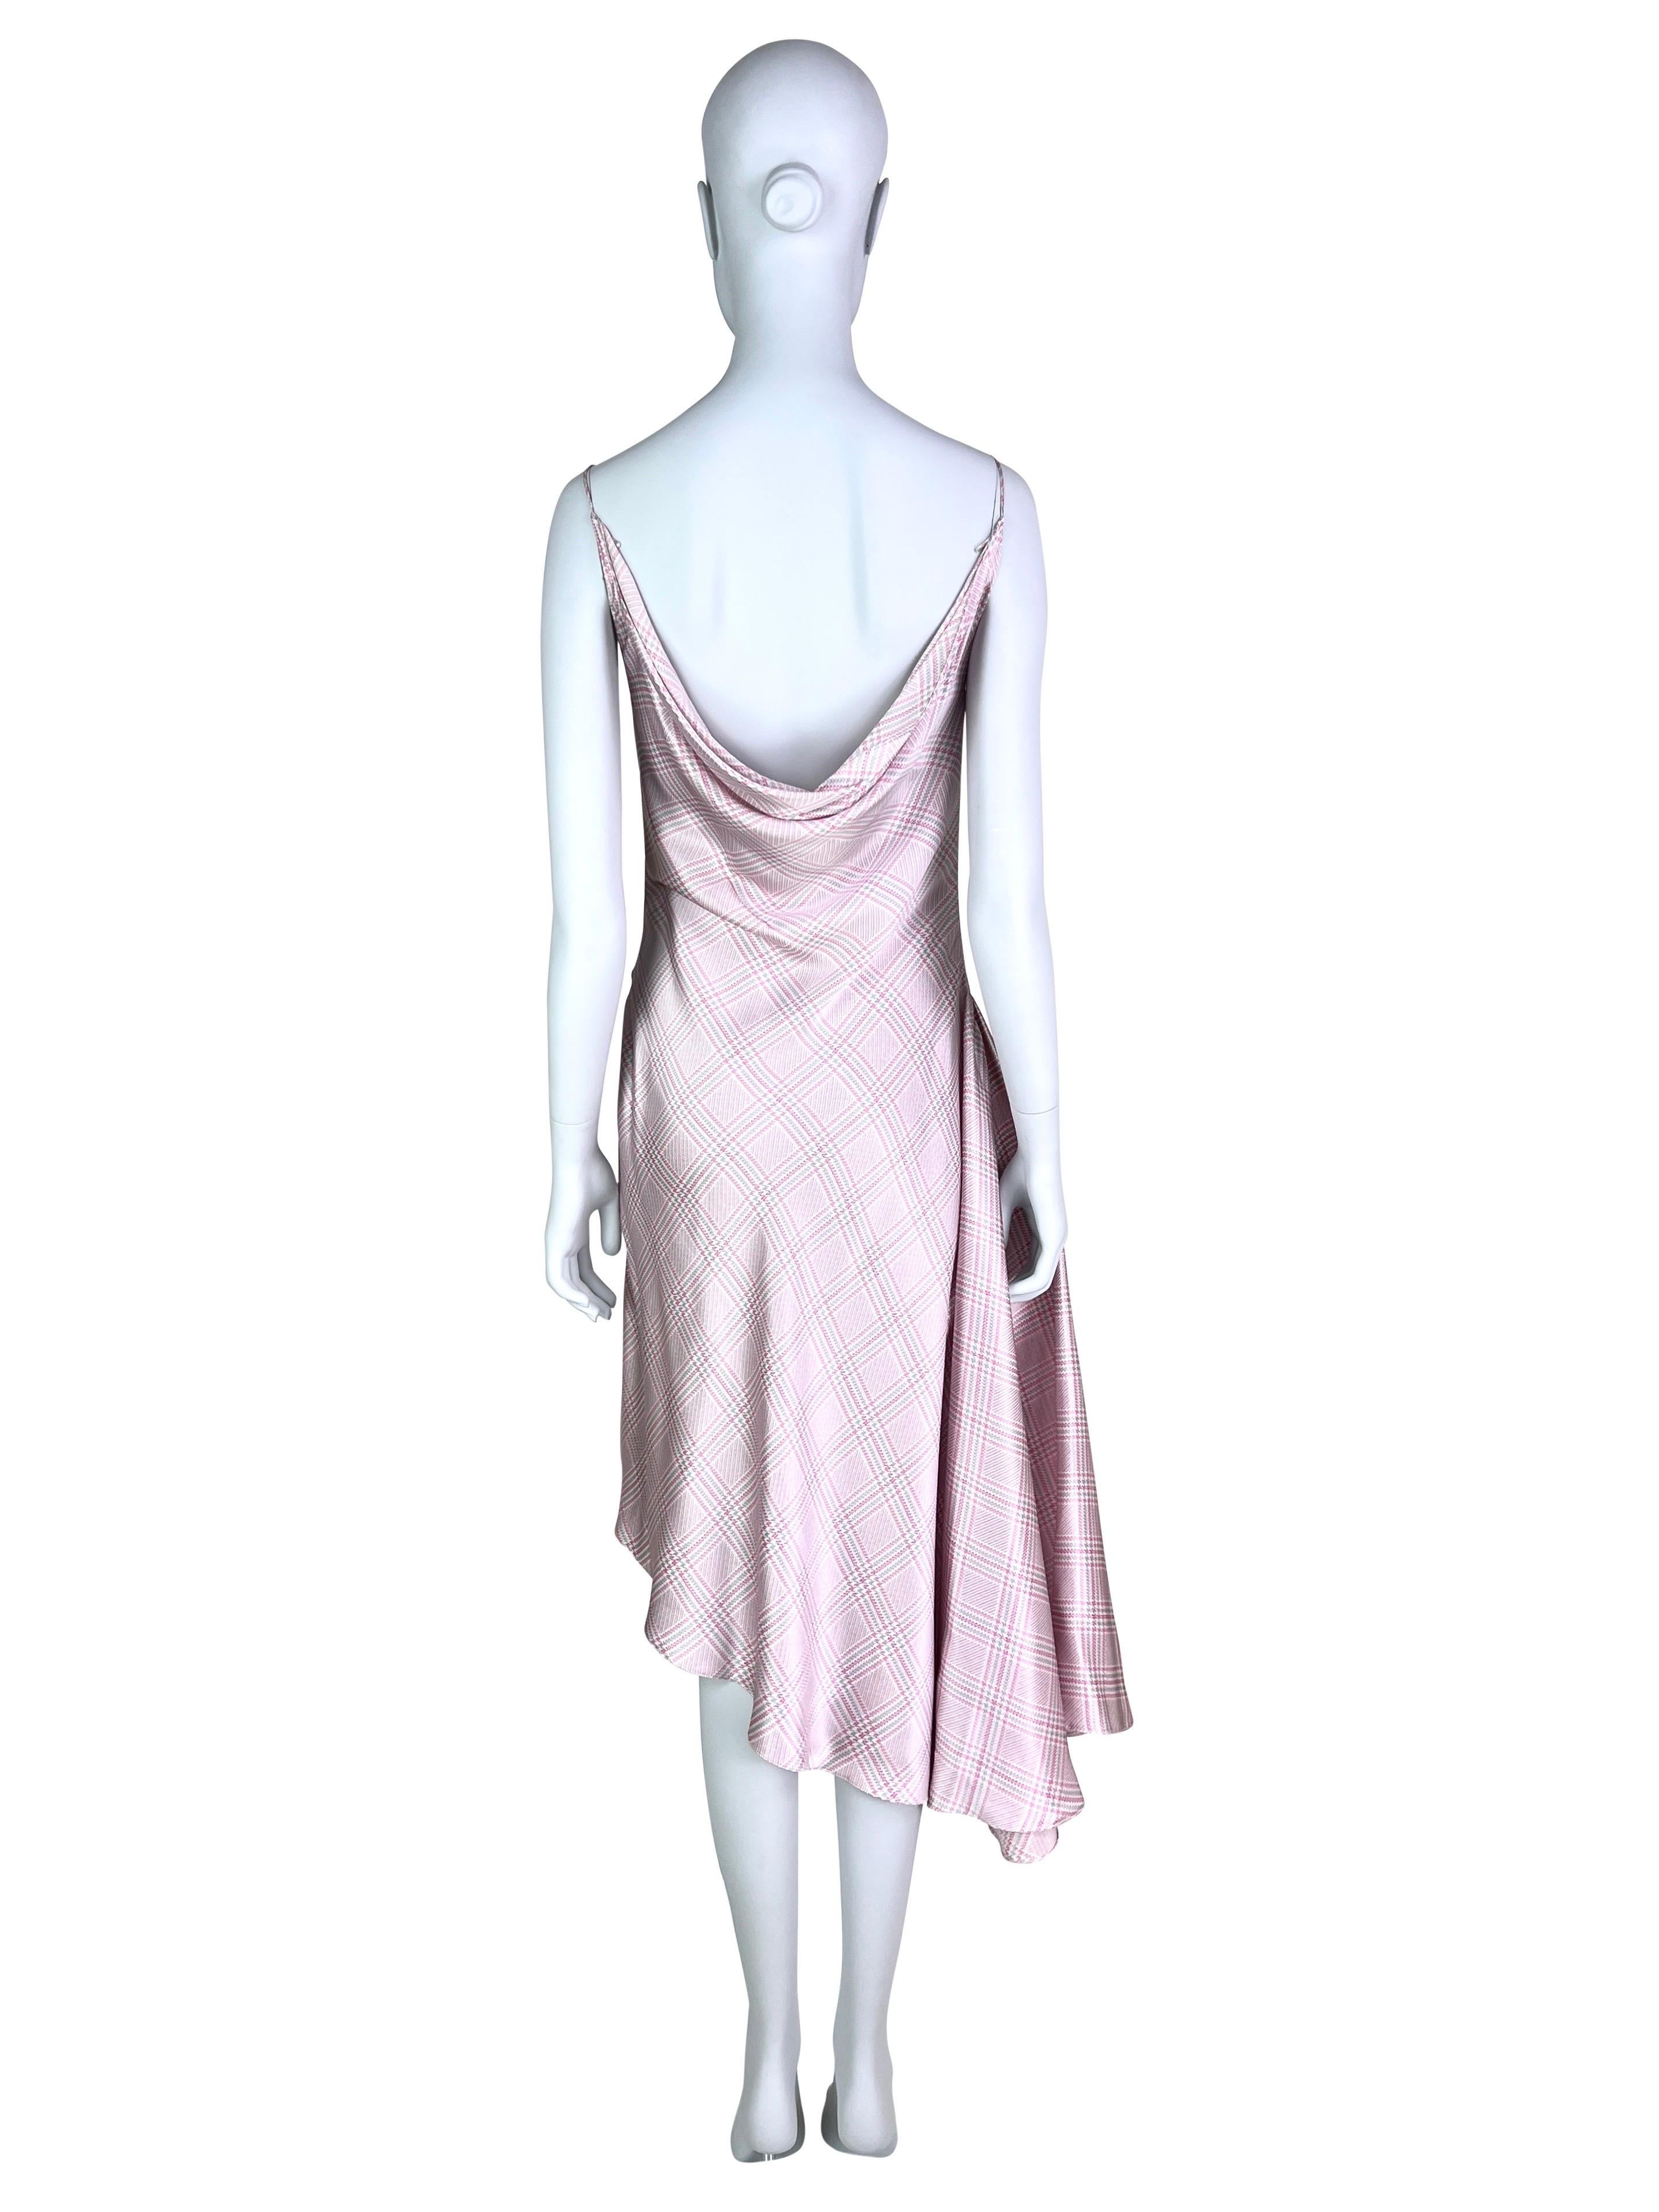 Women's Givenchy by Alexander McQueen Spring 1998 Silk Dress For Sale